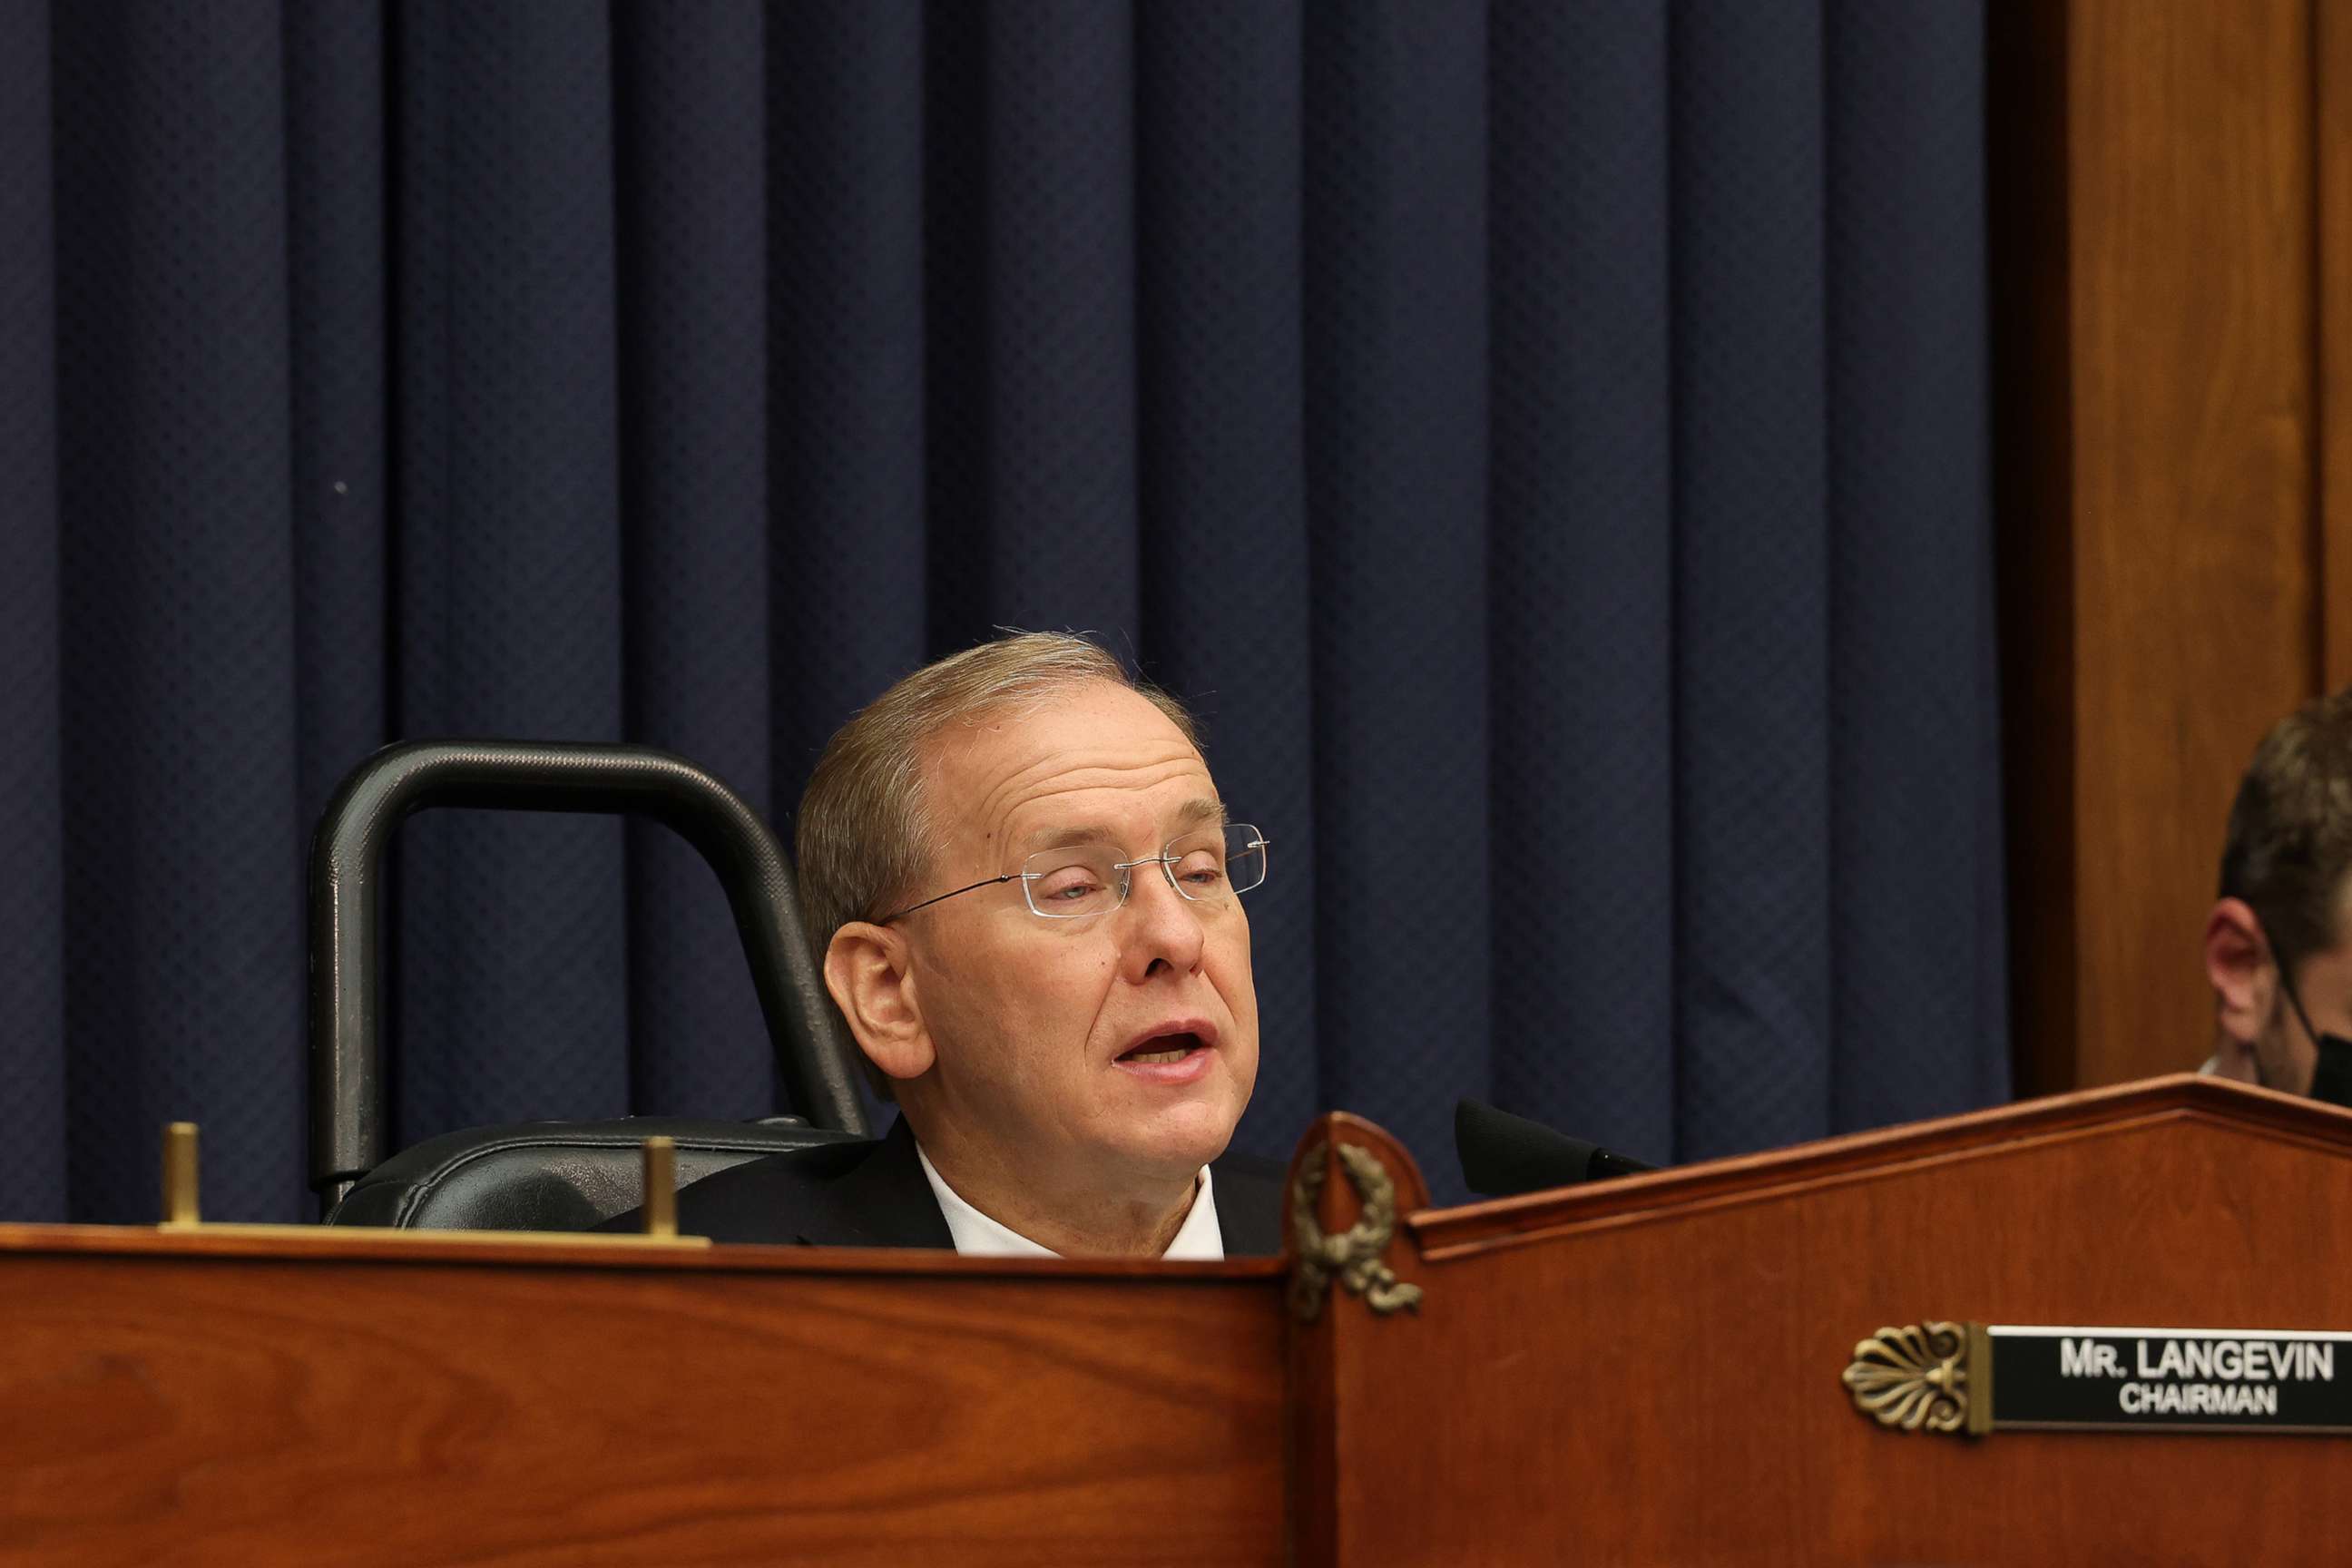 PHOTO: Subcommittee chairman Jim Langevin gives opening remarks at hearing with the House Armed Services Subcommittee on Cyber, Innovative Technologies, and Information System on Capitol Hill, May 14, 2021.